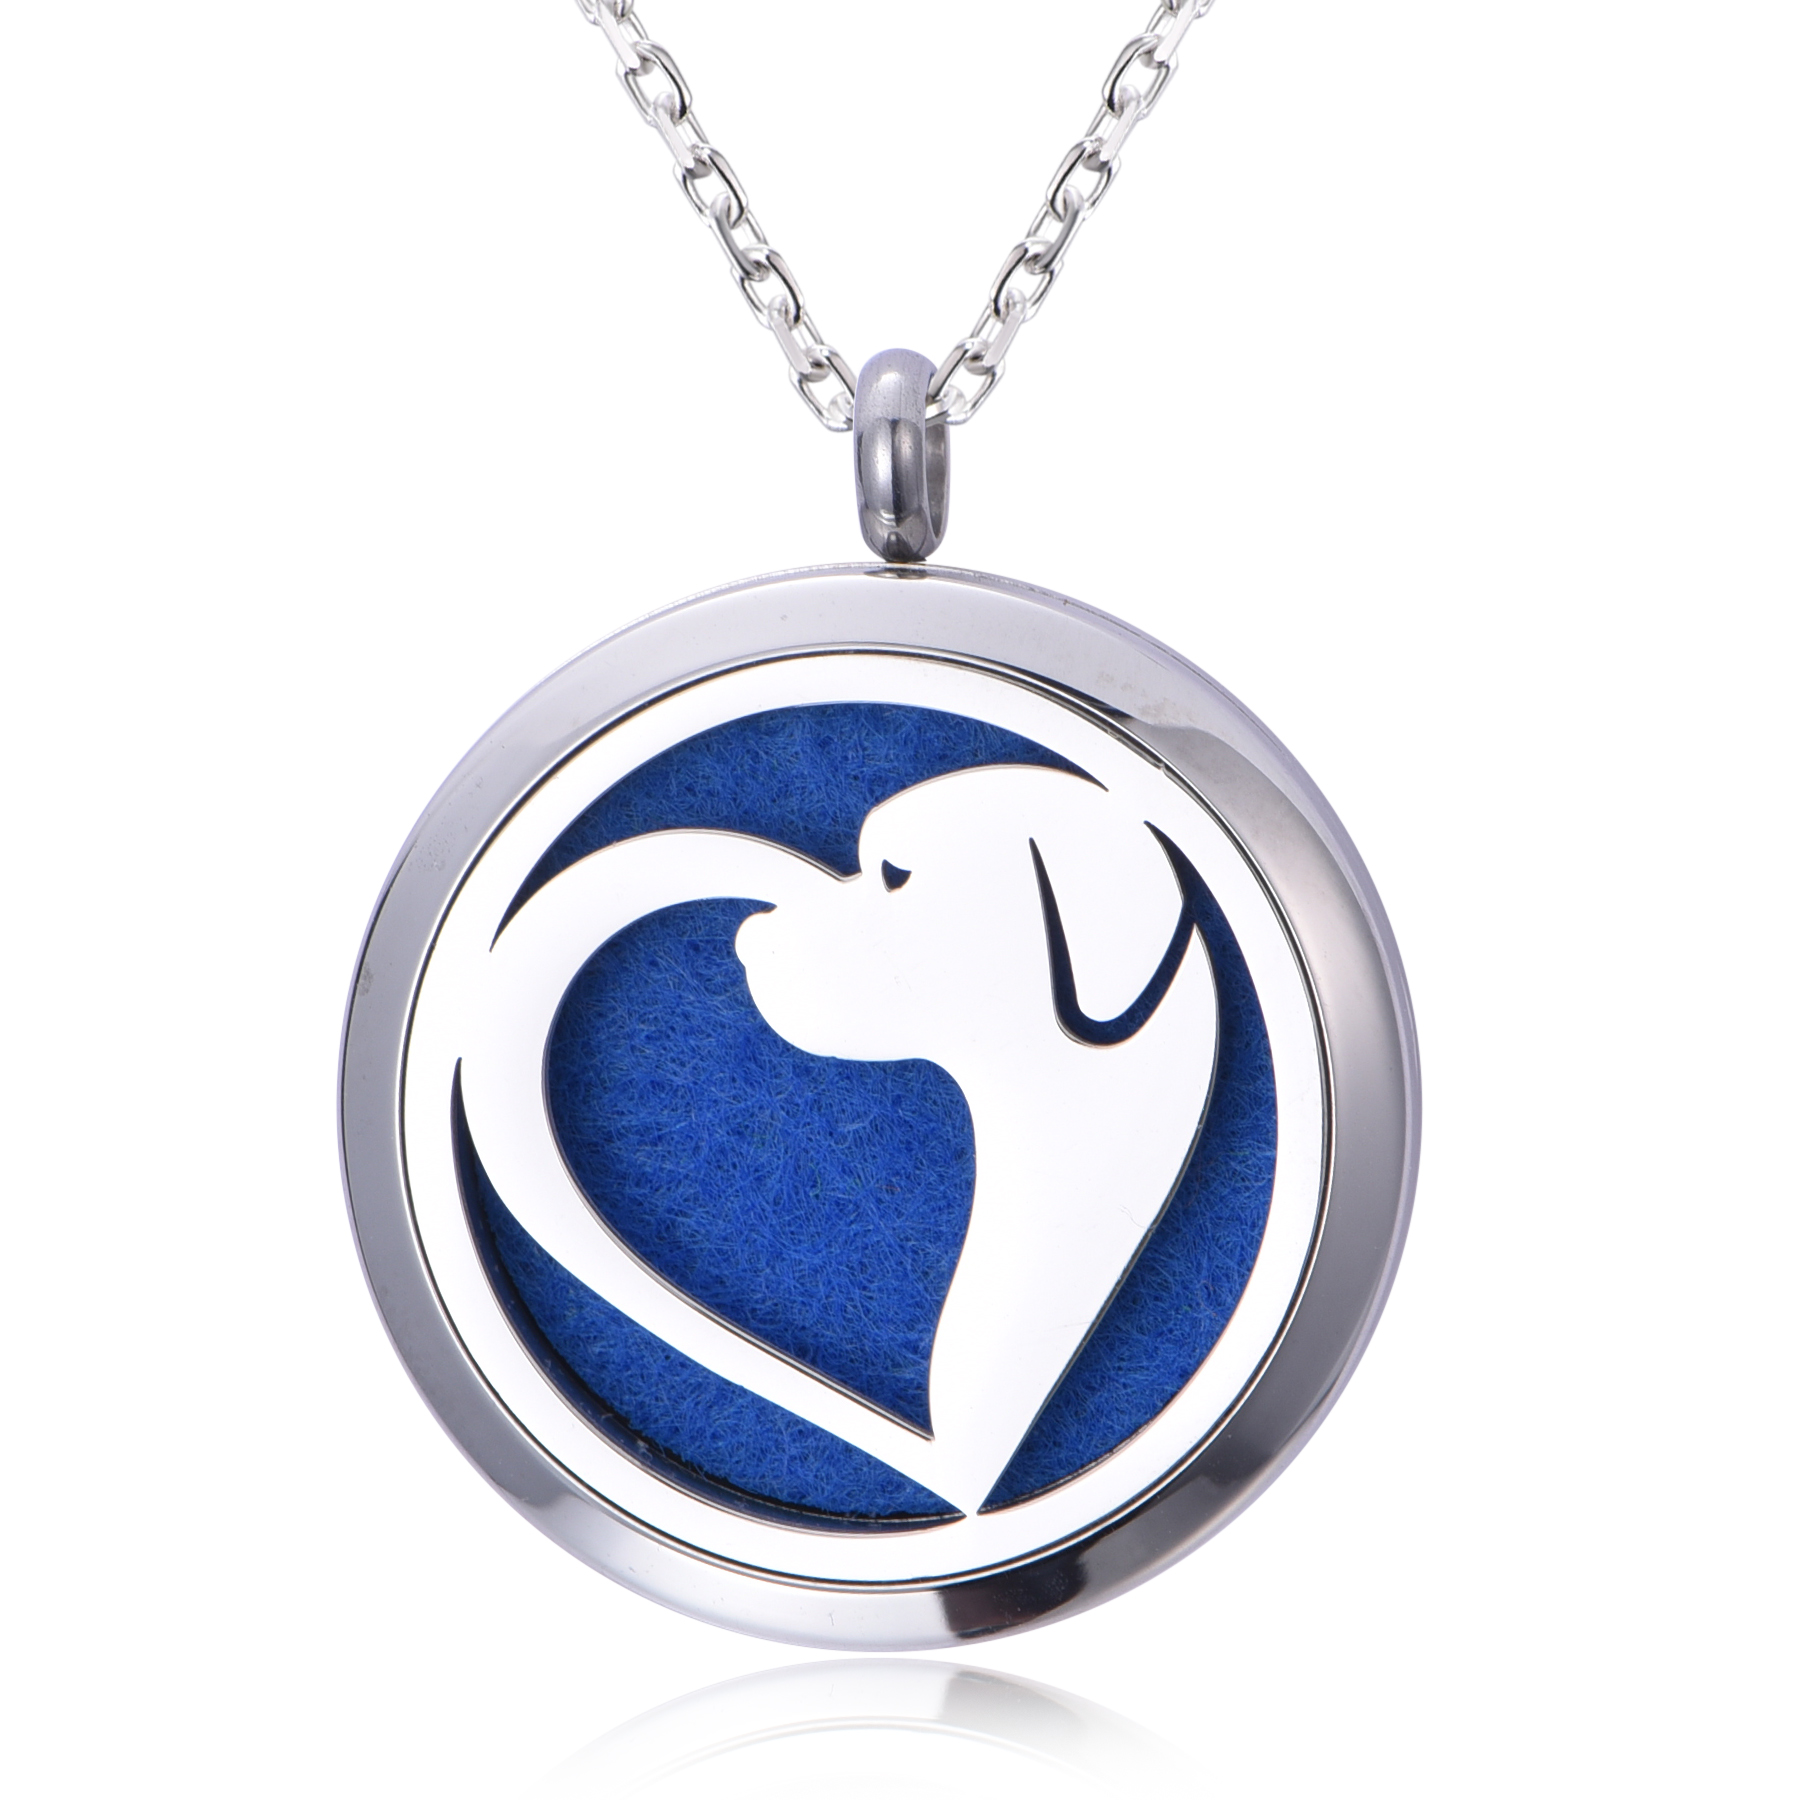 Silver Color Stainless Steel Cute Dog Heart Perfume Diffuse Locket Pendant Necklace NS10-05